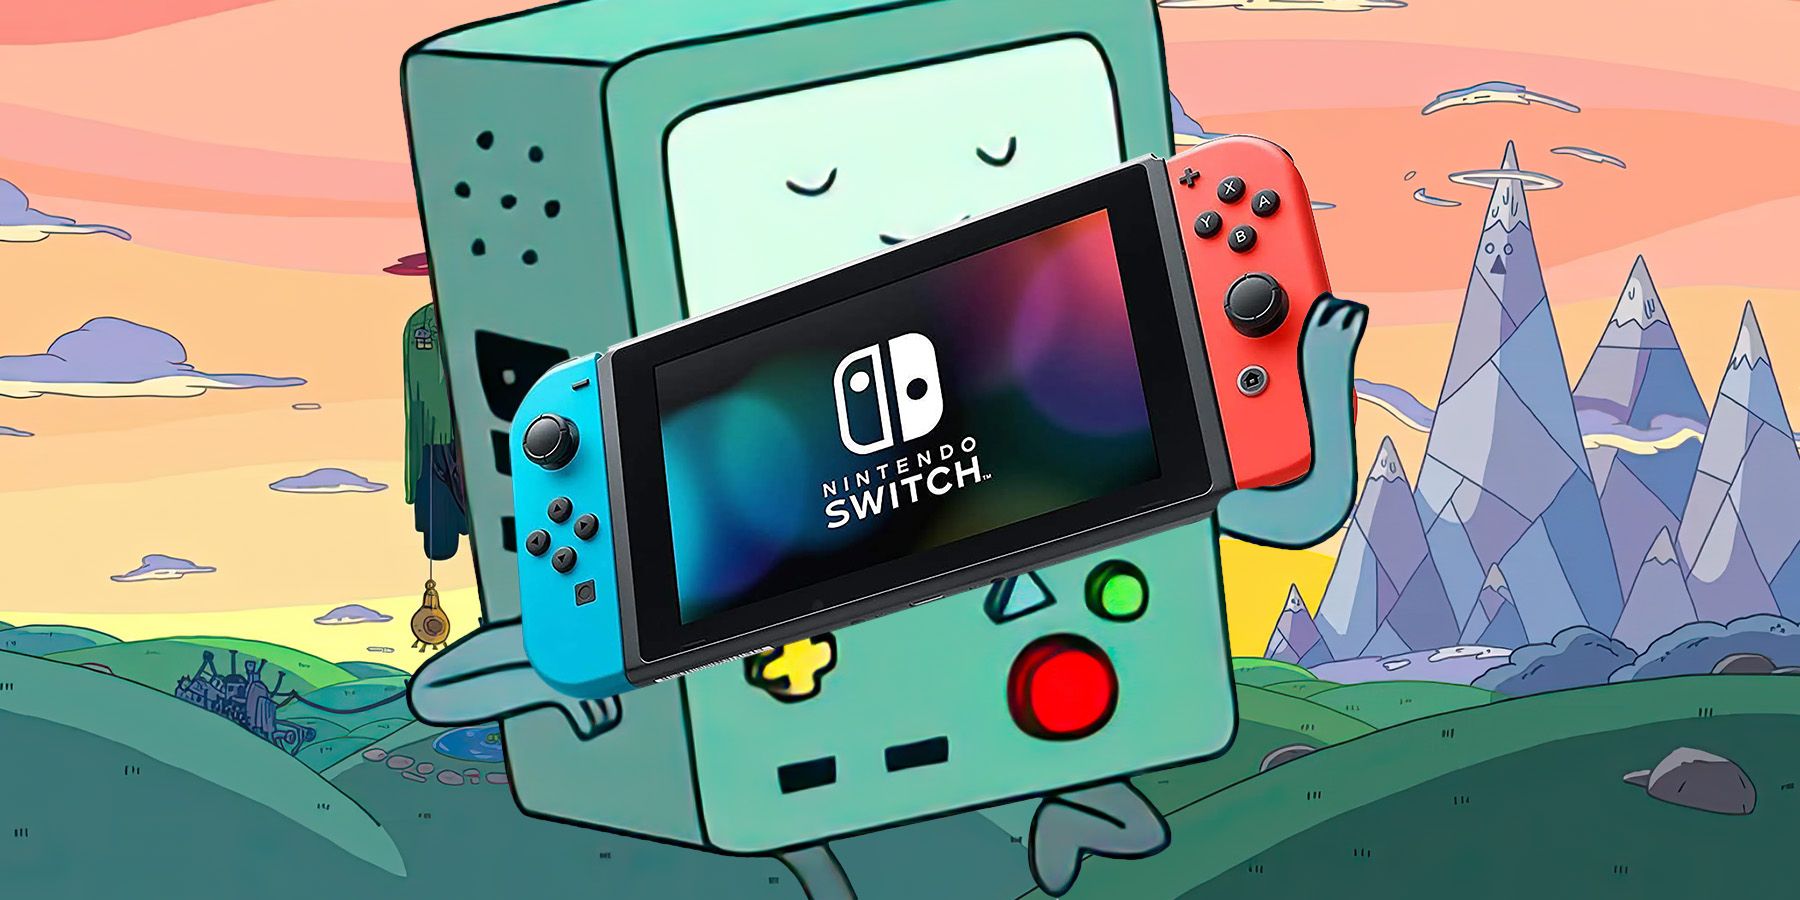 bmo from adventure time holding a nintendo switch